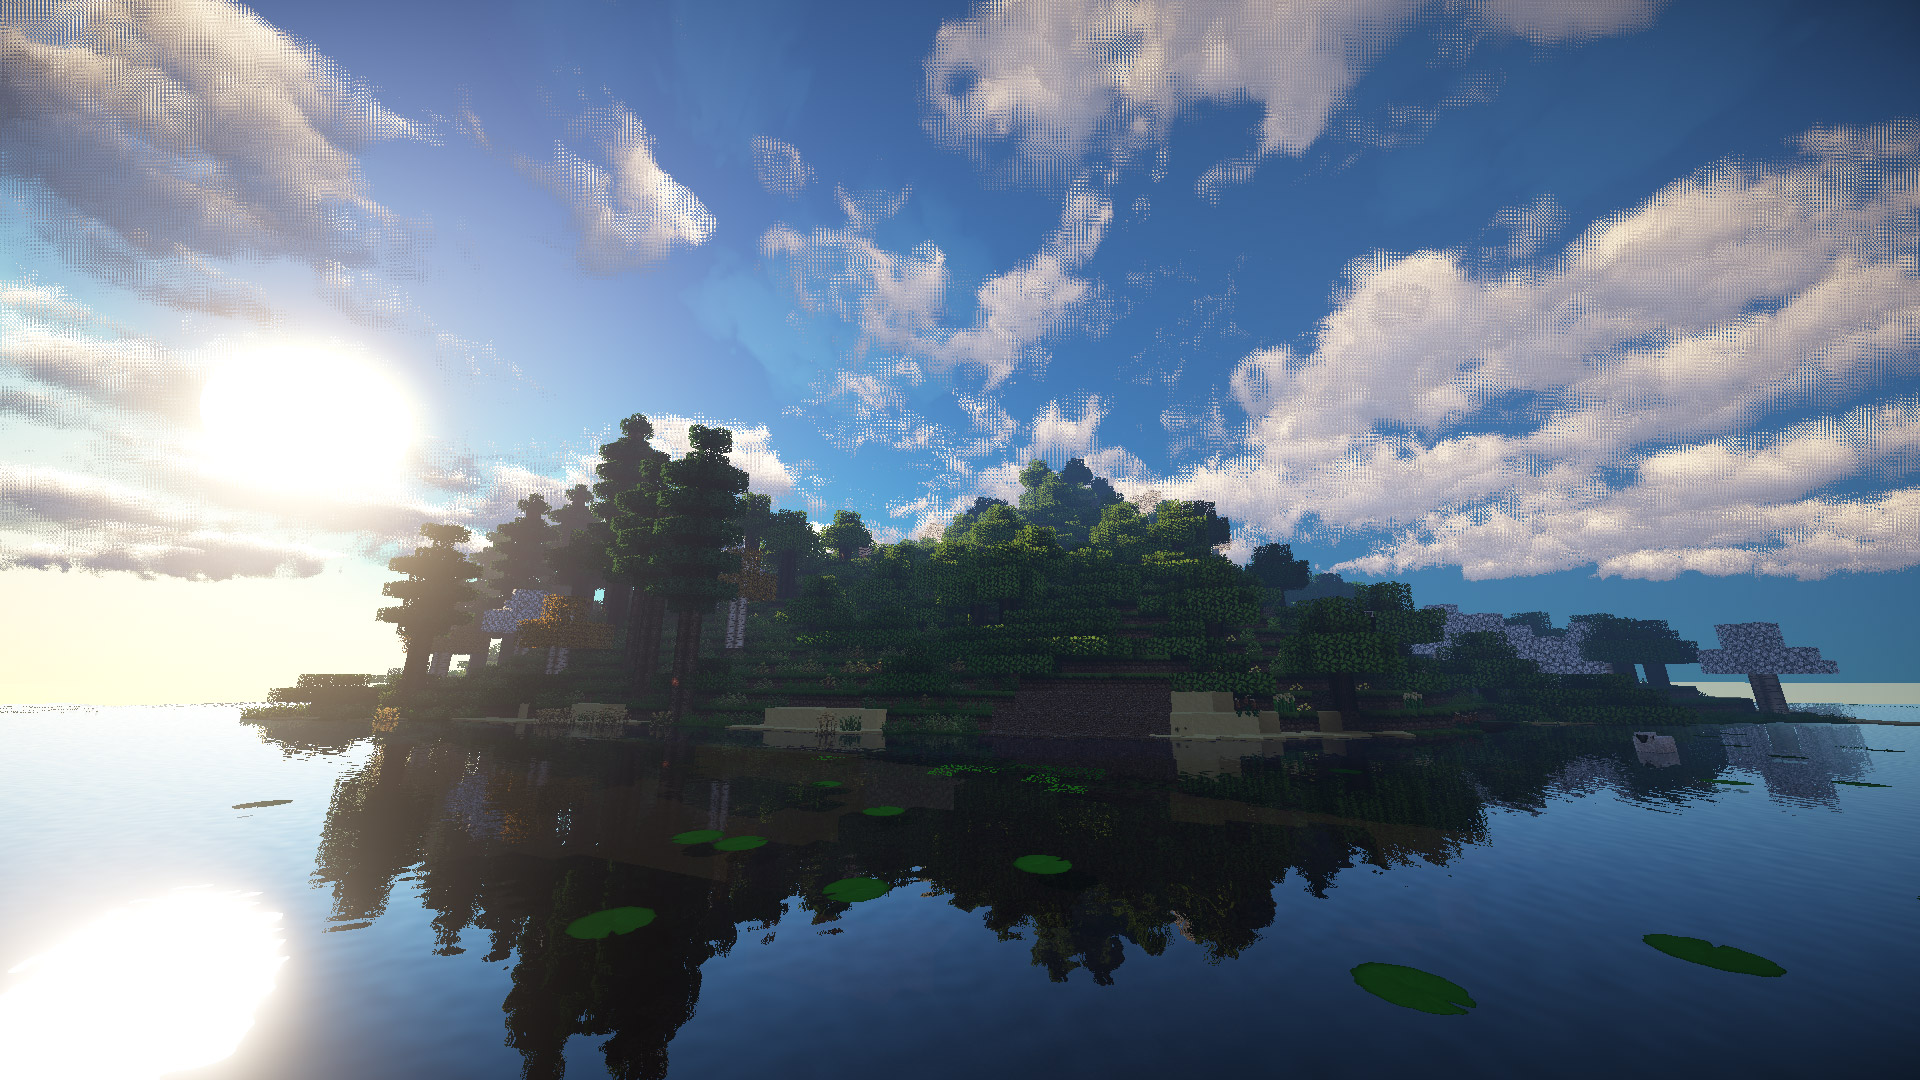  Free download Free Minecraft Wallpaper in 1920x1080 1920x1080 for 